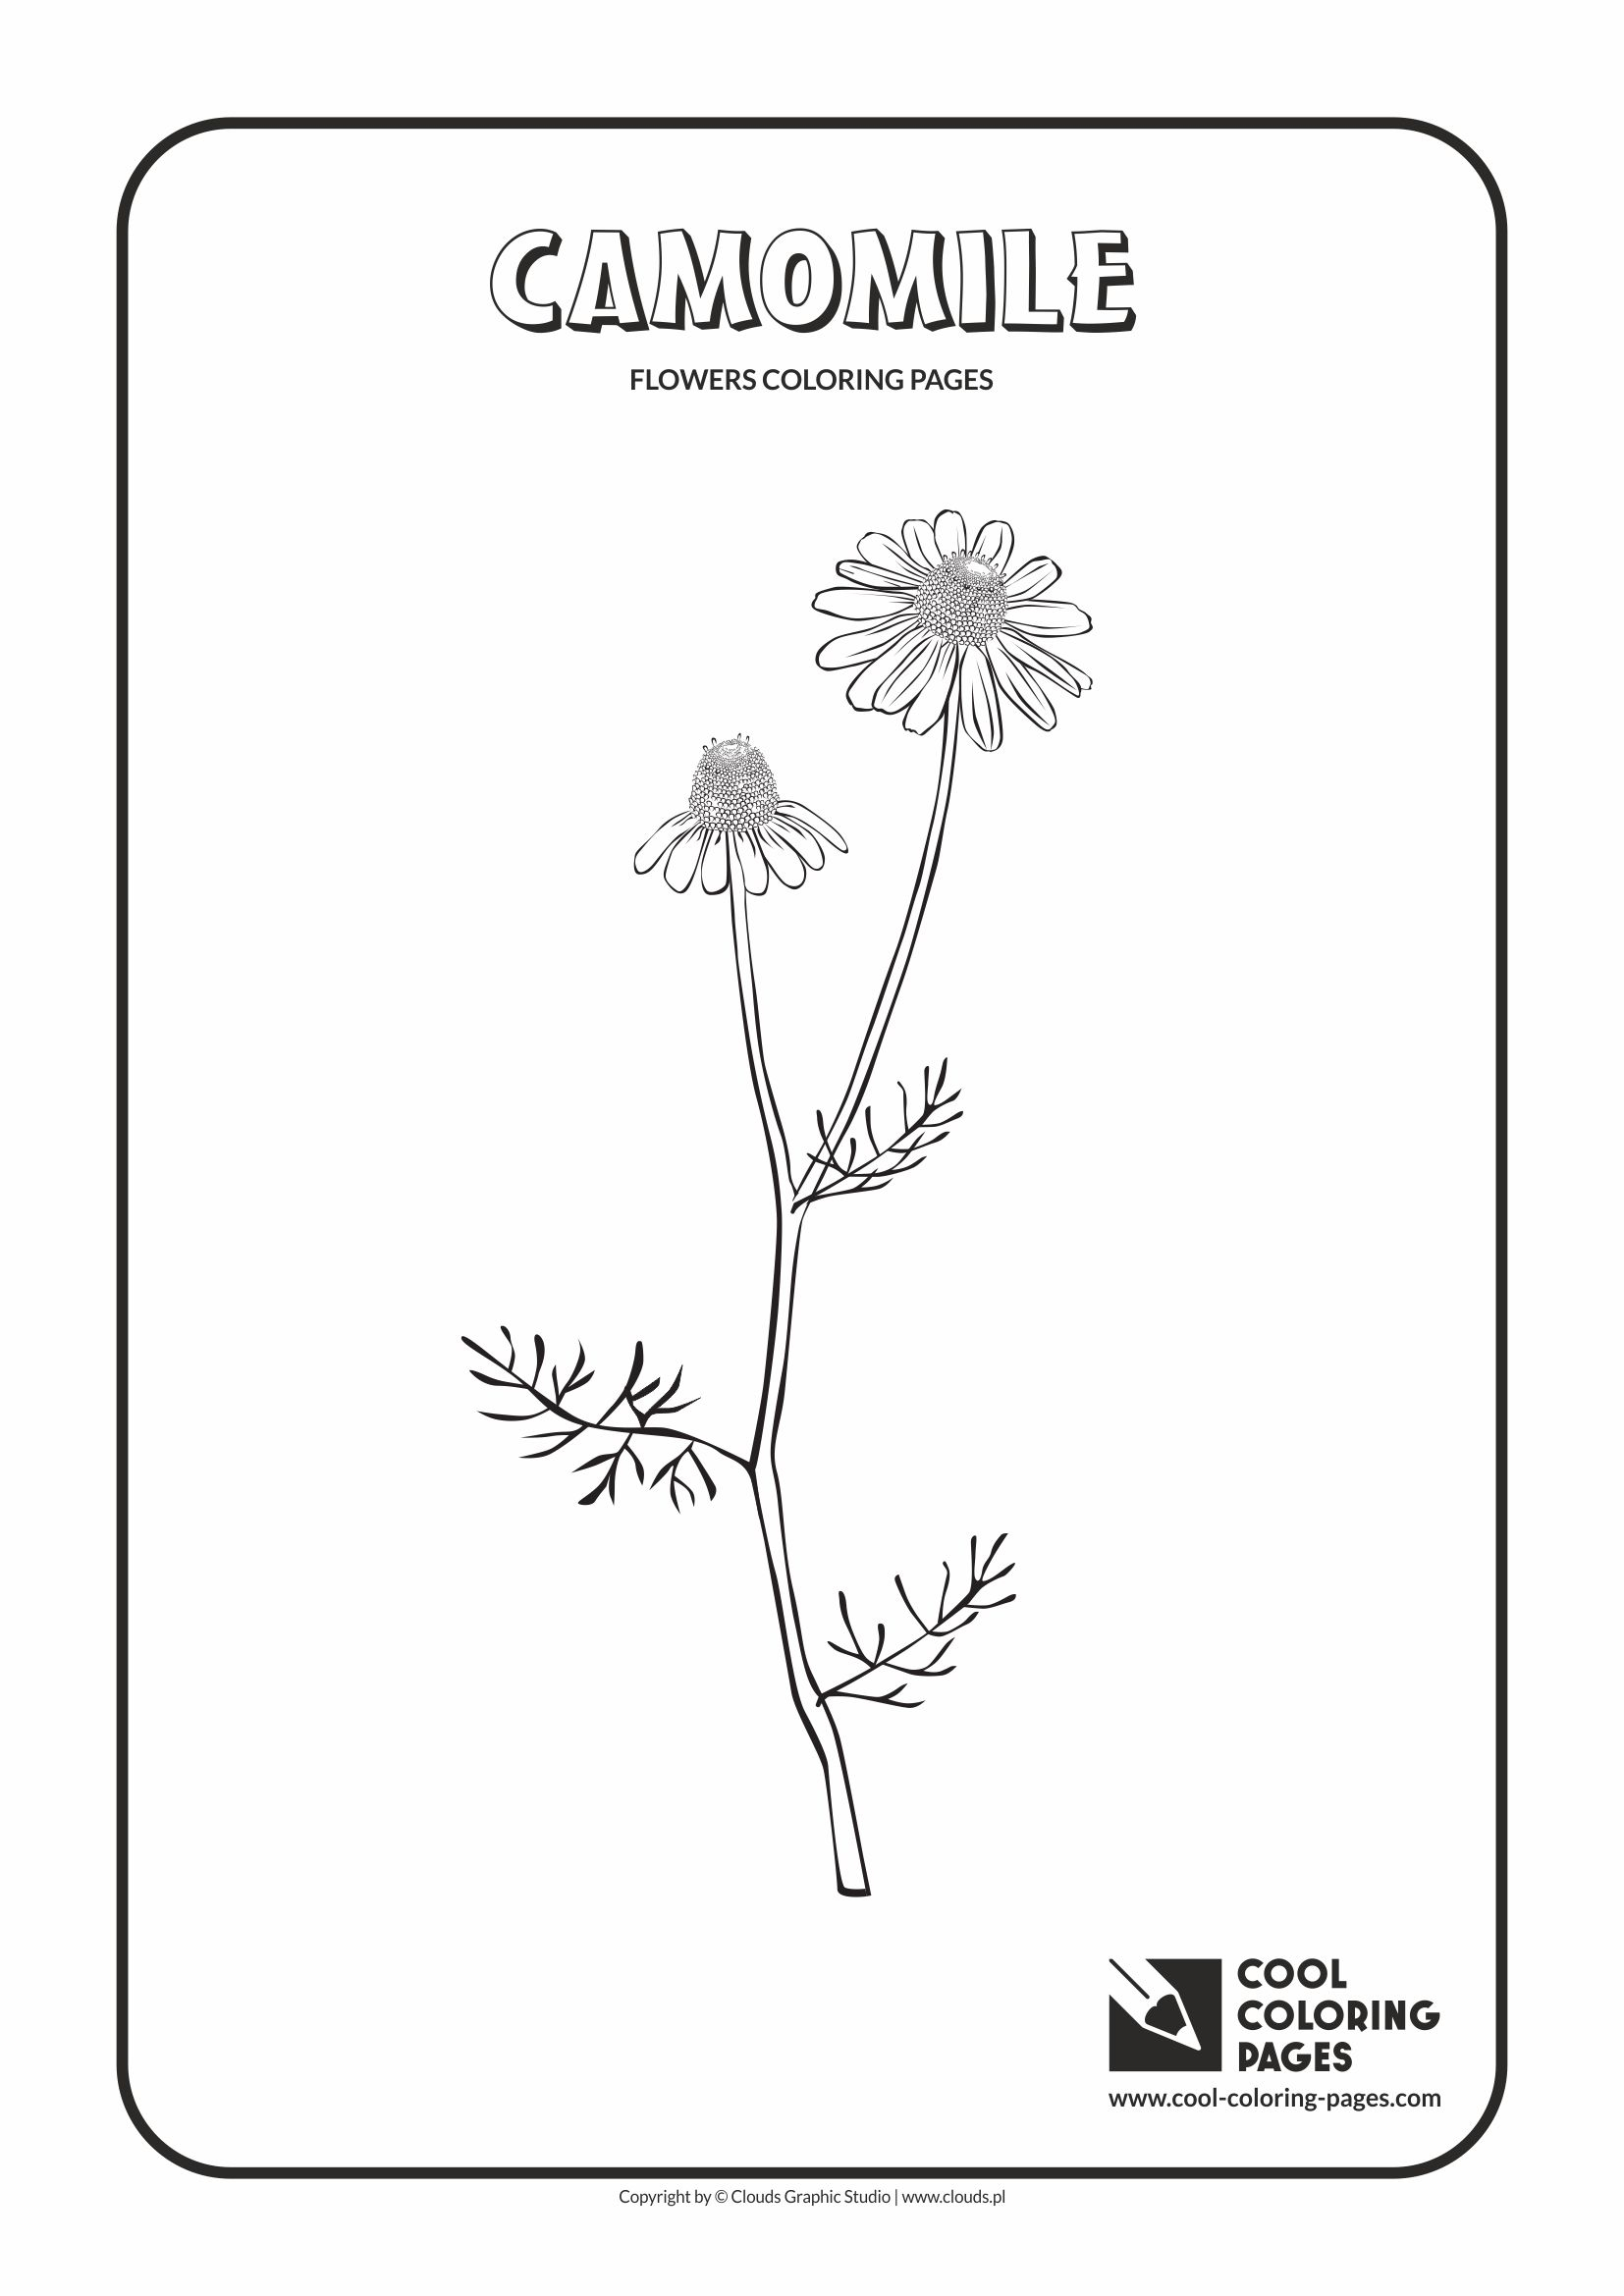 Lily Of The Valley Coloring Page Cool Coloring Pages Flowers Coloring Pages Cool Coloring Pages